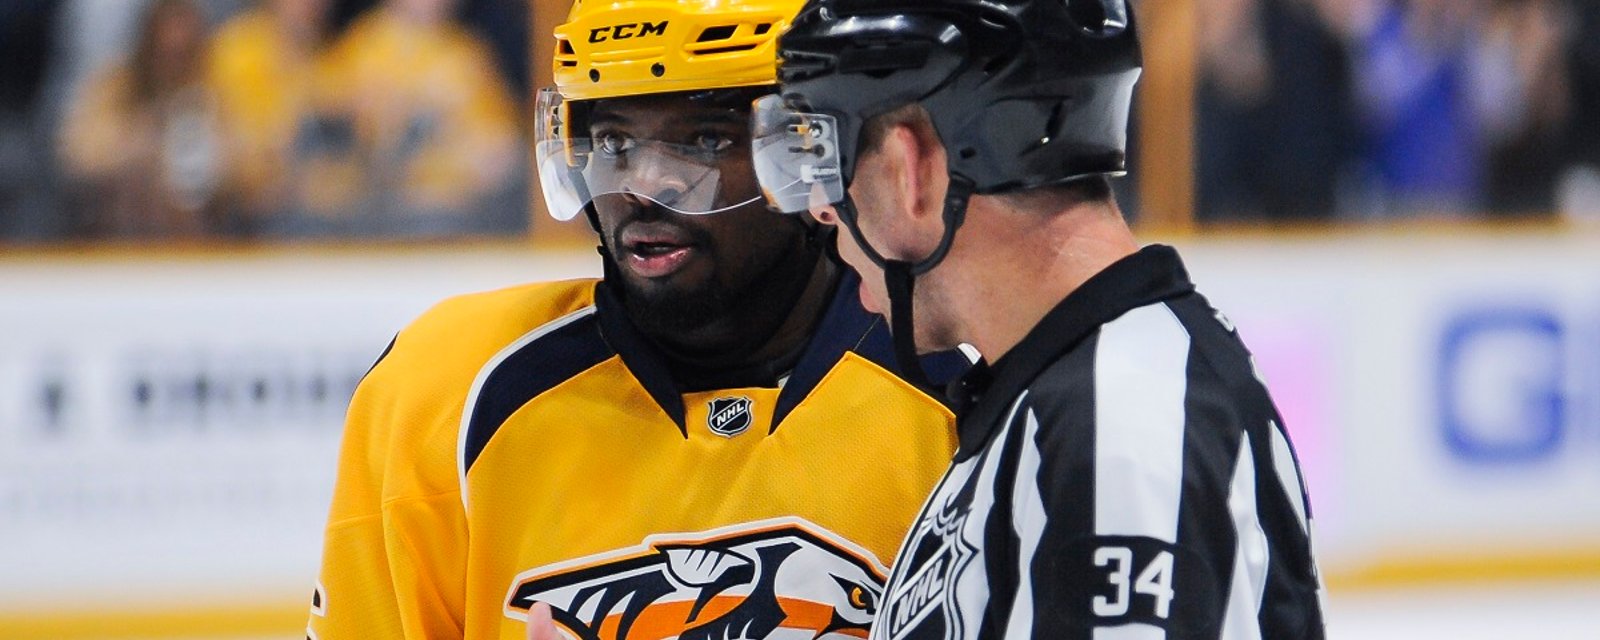 Report: Major update on P.K. Subban on Monday.